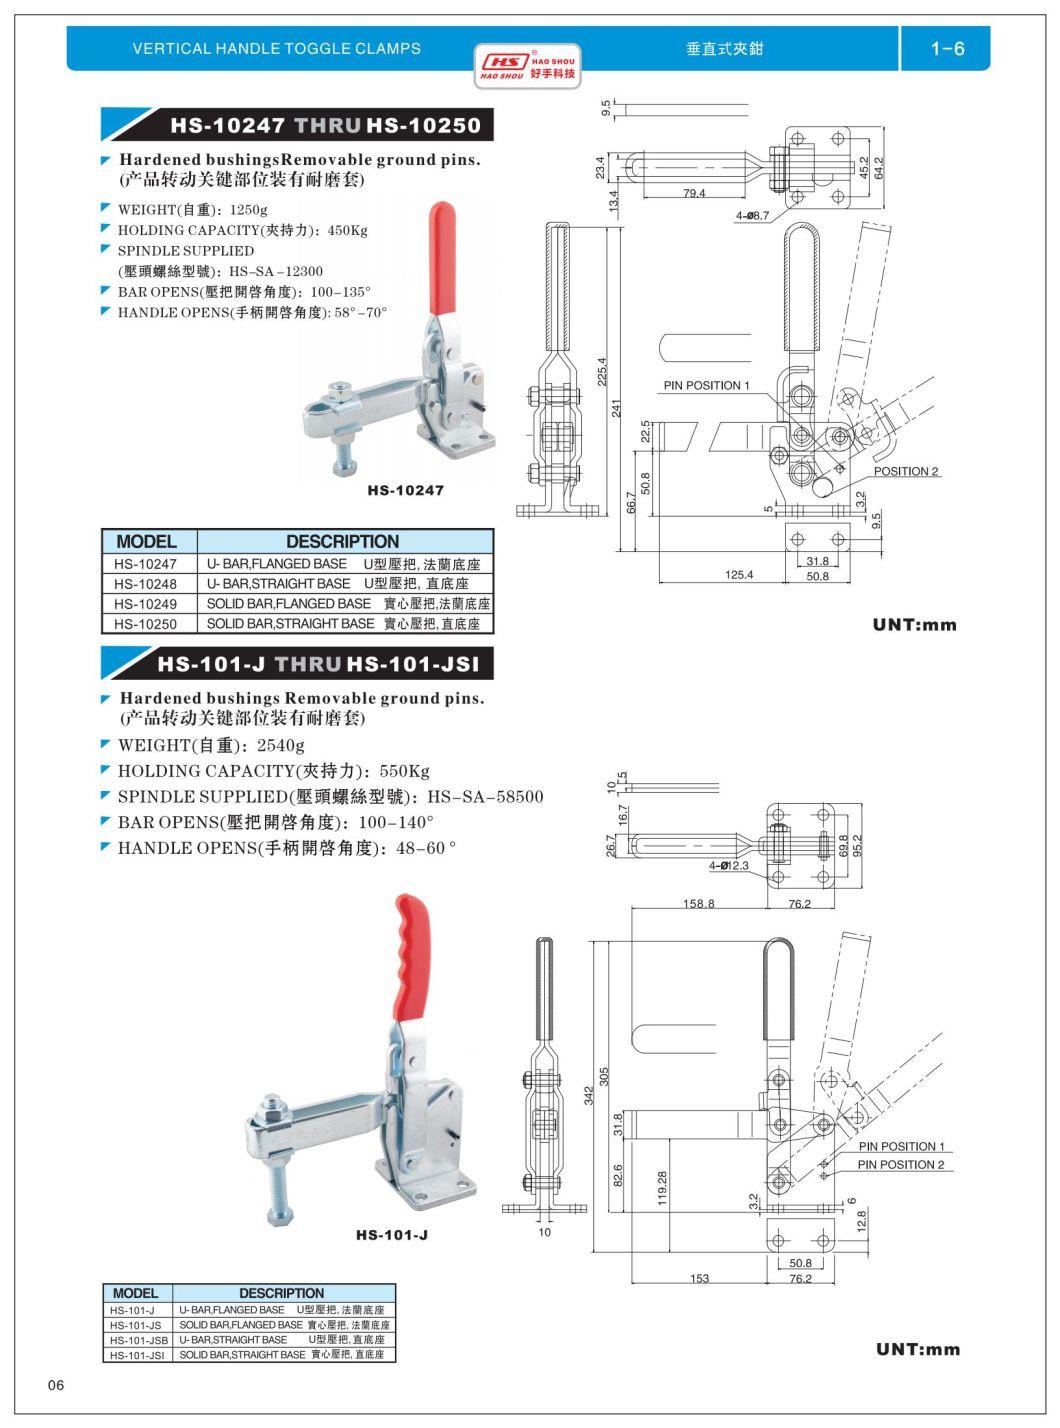 Haoshou HS-10248 Similar to 247-Ub Hold Down Quick Release Vertical Adjustable Toggle Clamp for Wood Products